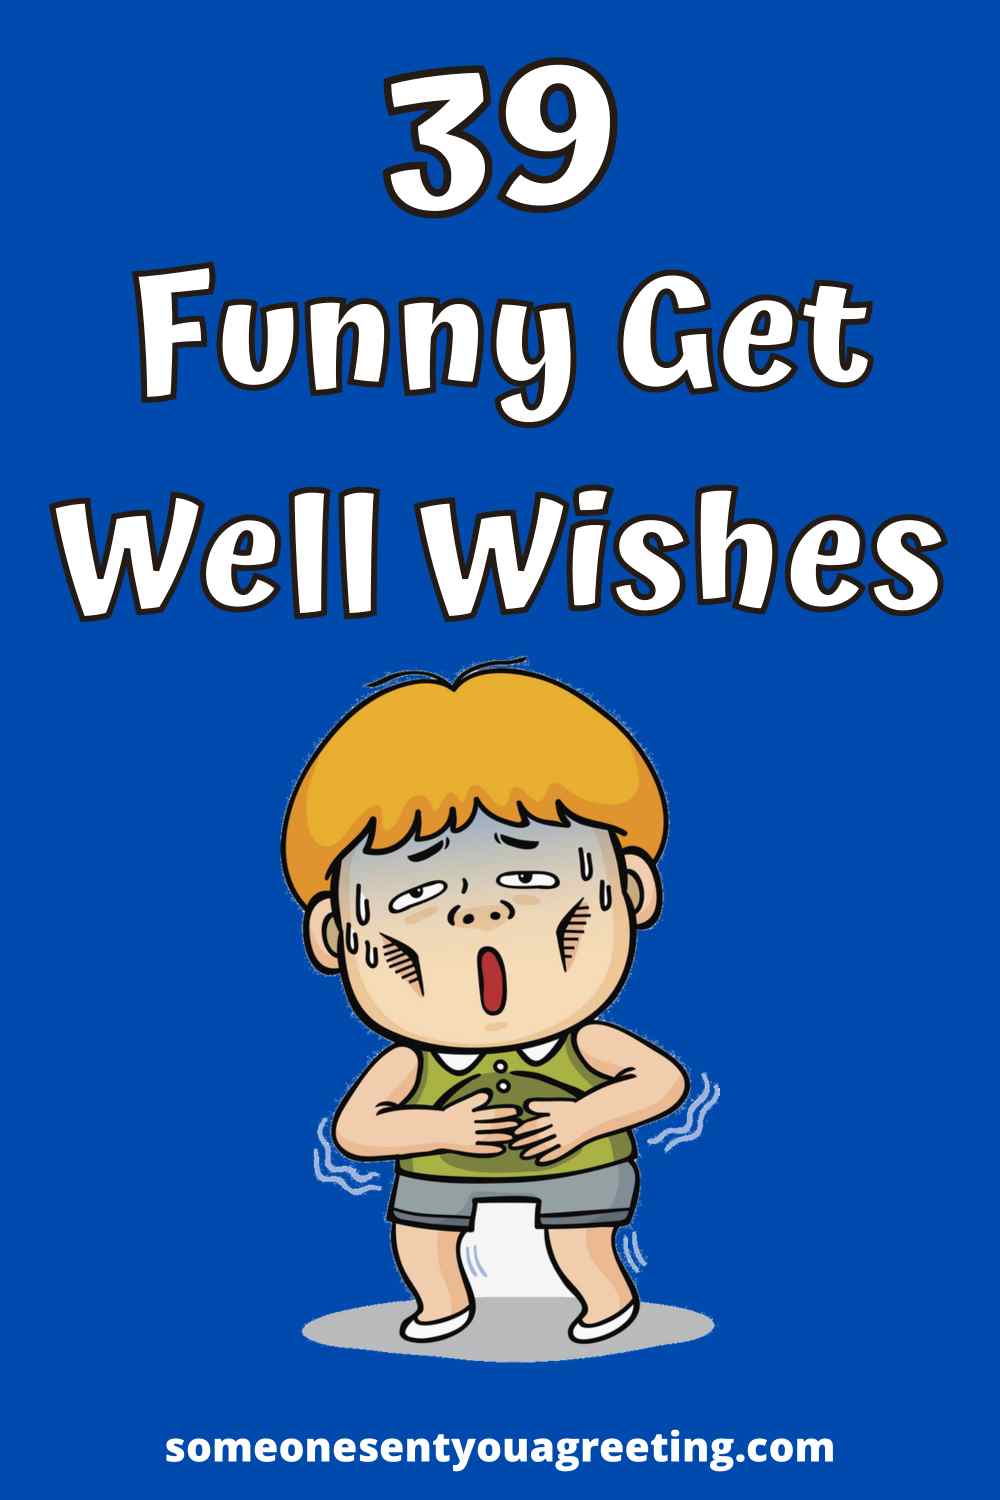 39 Funny Get Well Wishes and Messages - Someone Sent You A Greeting